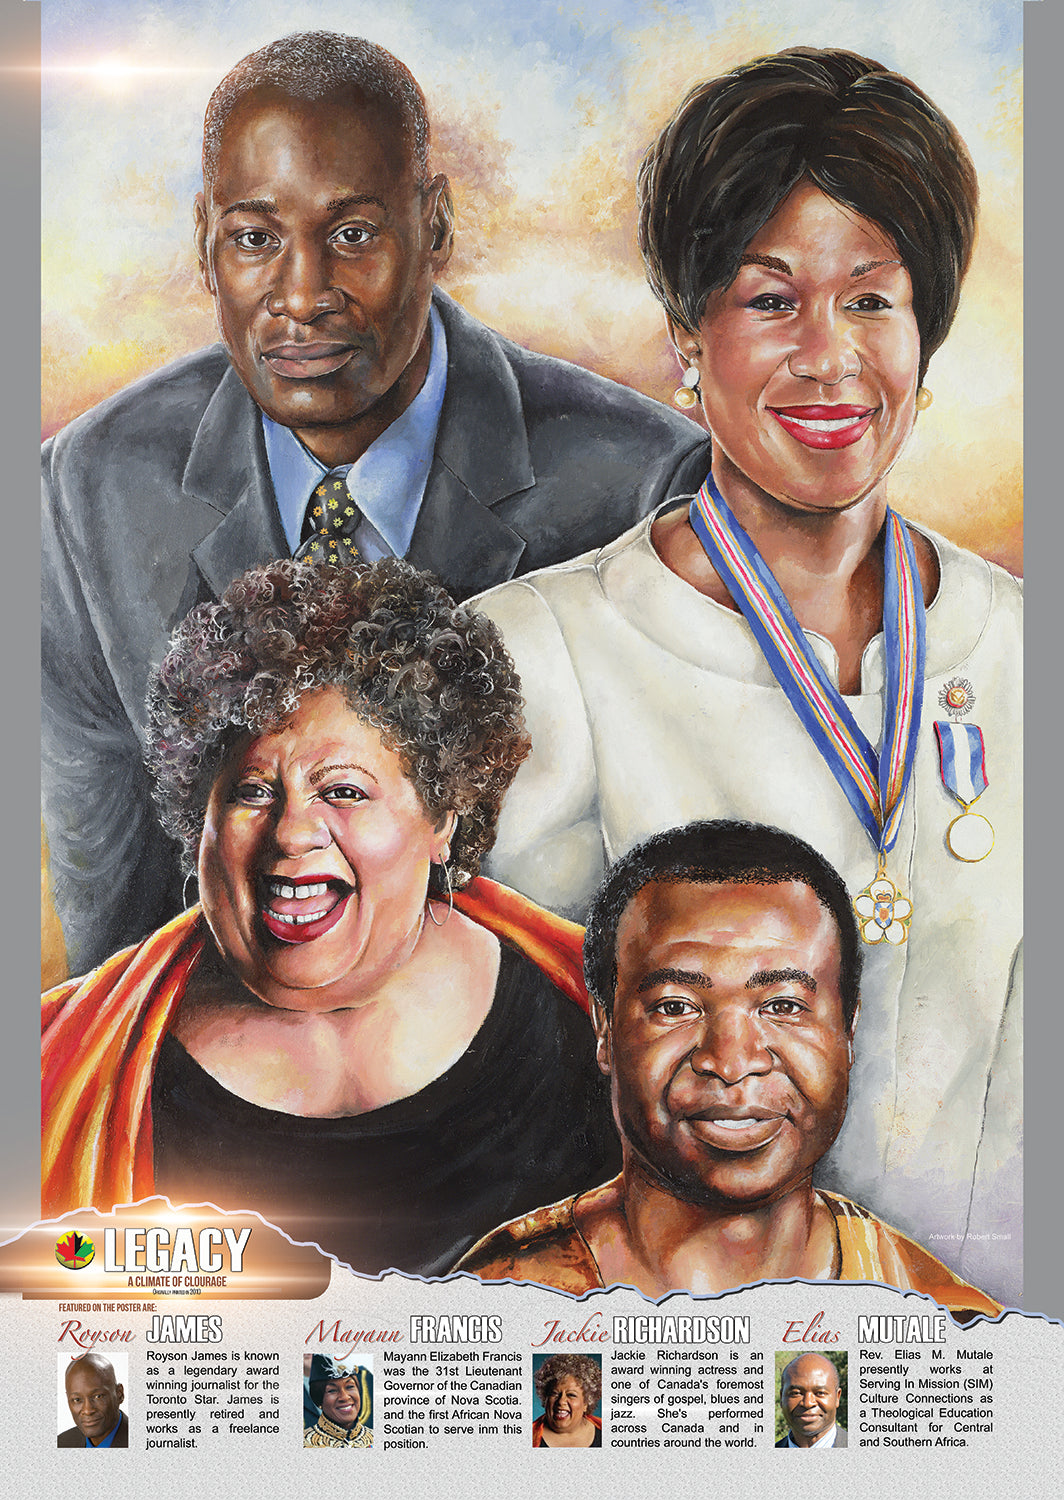 “An educational poster, ideal for Black History Month featuring journalist Royson James, the honourable Mayann Francis, Jackie Richardson, and the reverend Elias Mutale created by African-Canadian artist Robert Small.”